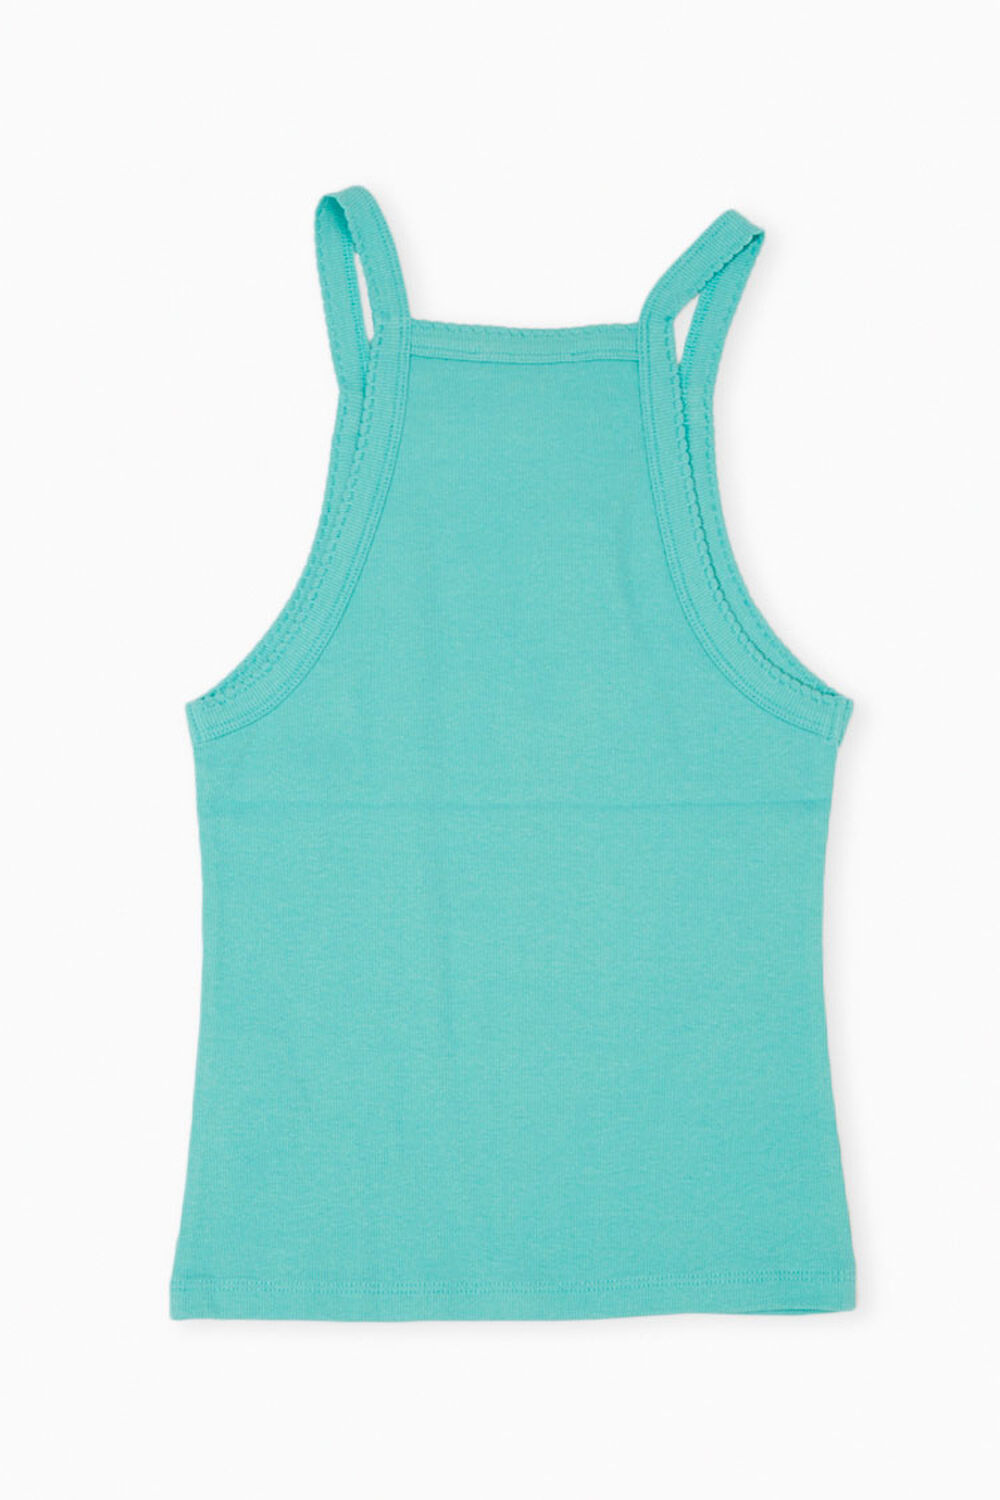 TEAL Scalloped-Trim Ribbed Cami, image 2